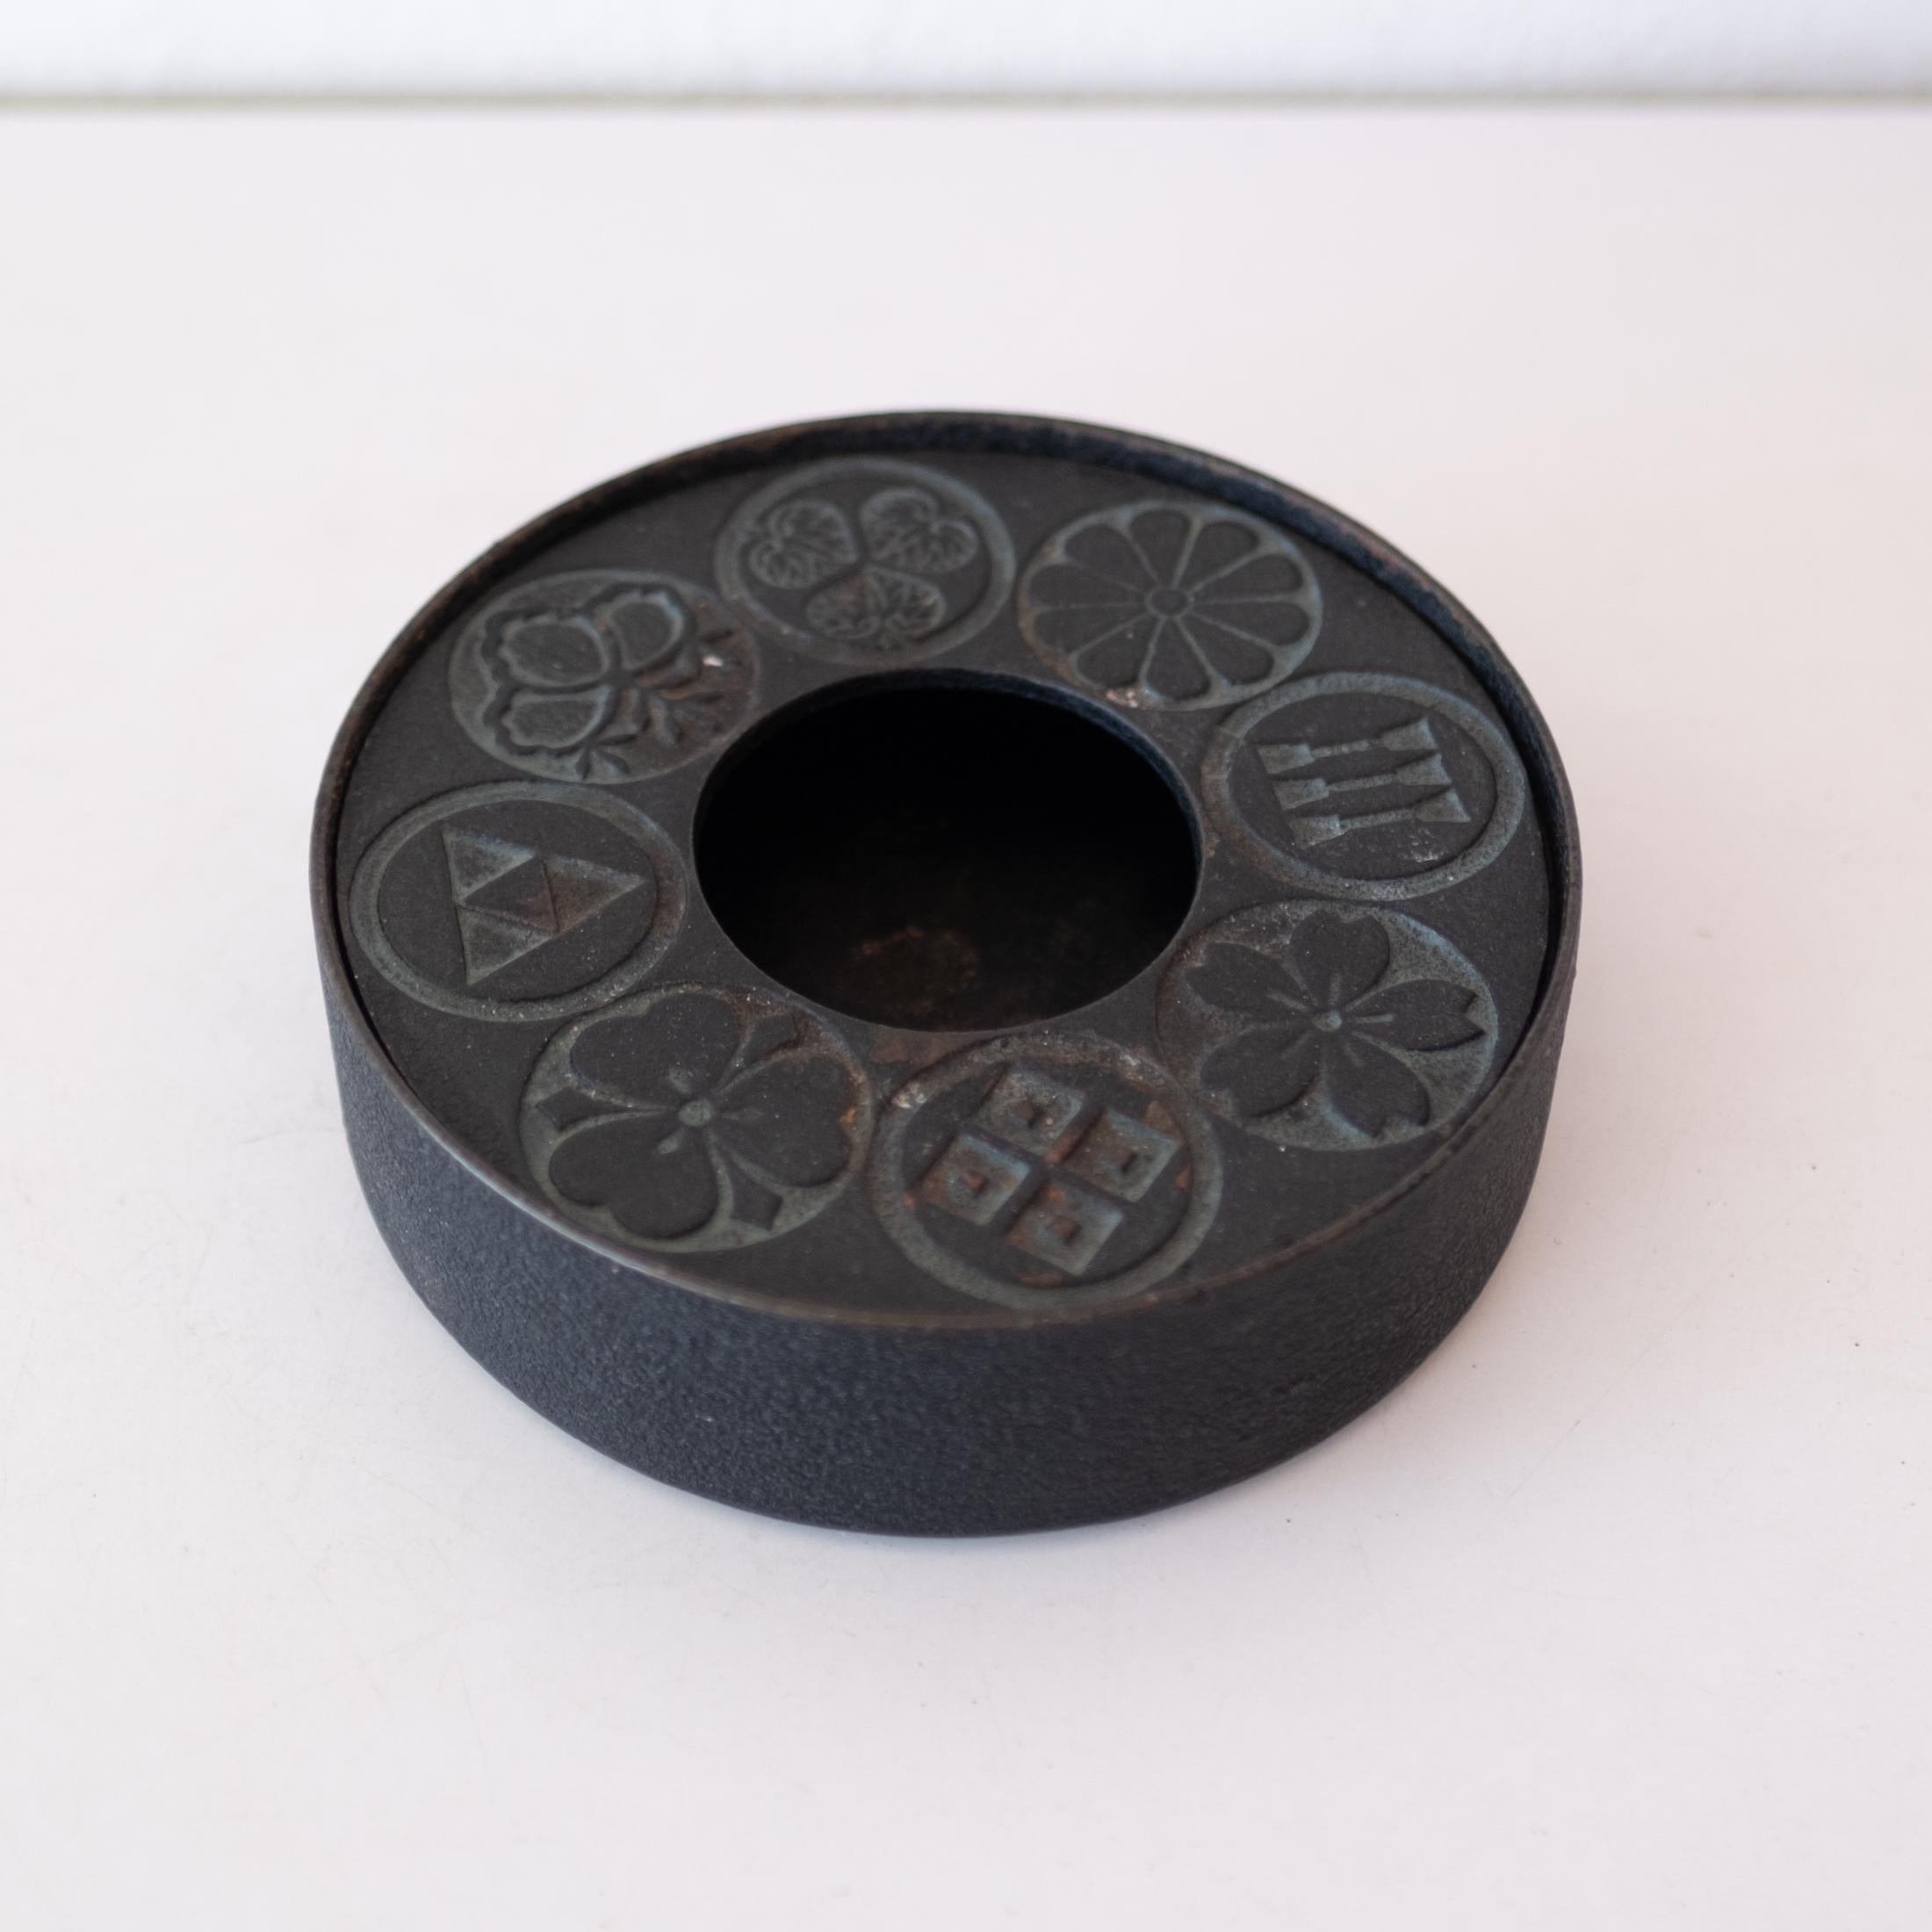 Japanese Nambu cast iron incense holder or bowl. Beautiful minimalist iron piece that could be used to hold incense with sand or as a decorative bowl. Made in Japan. 